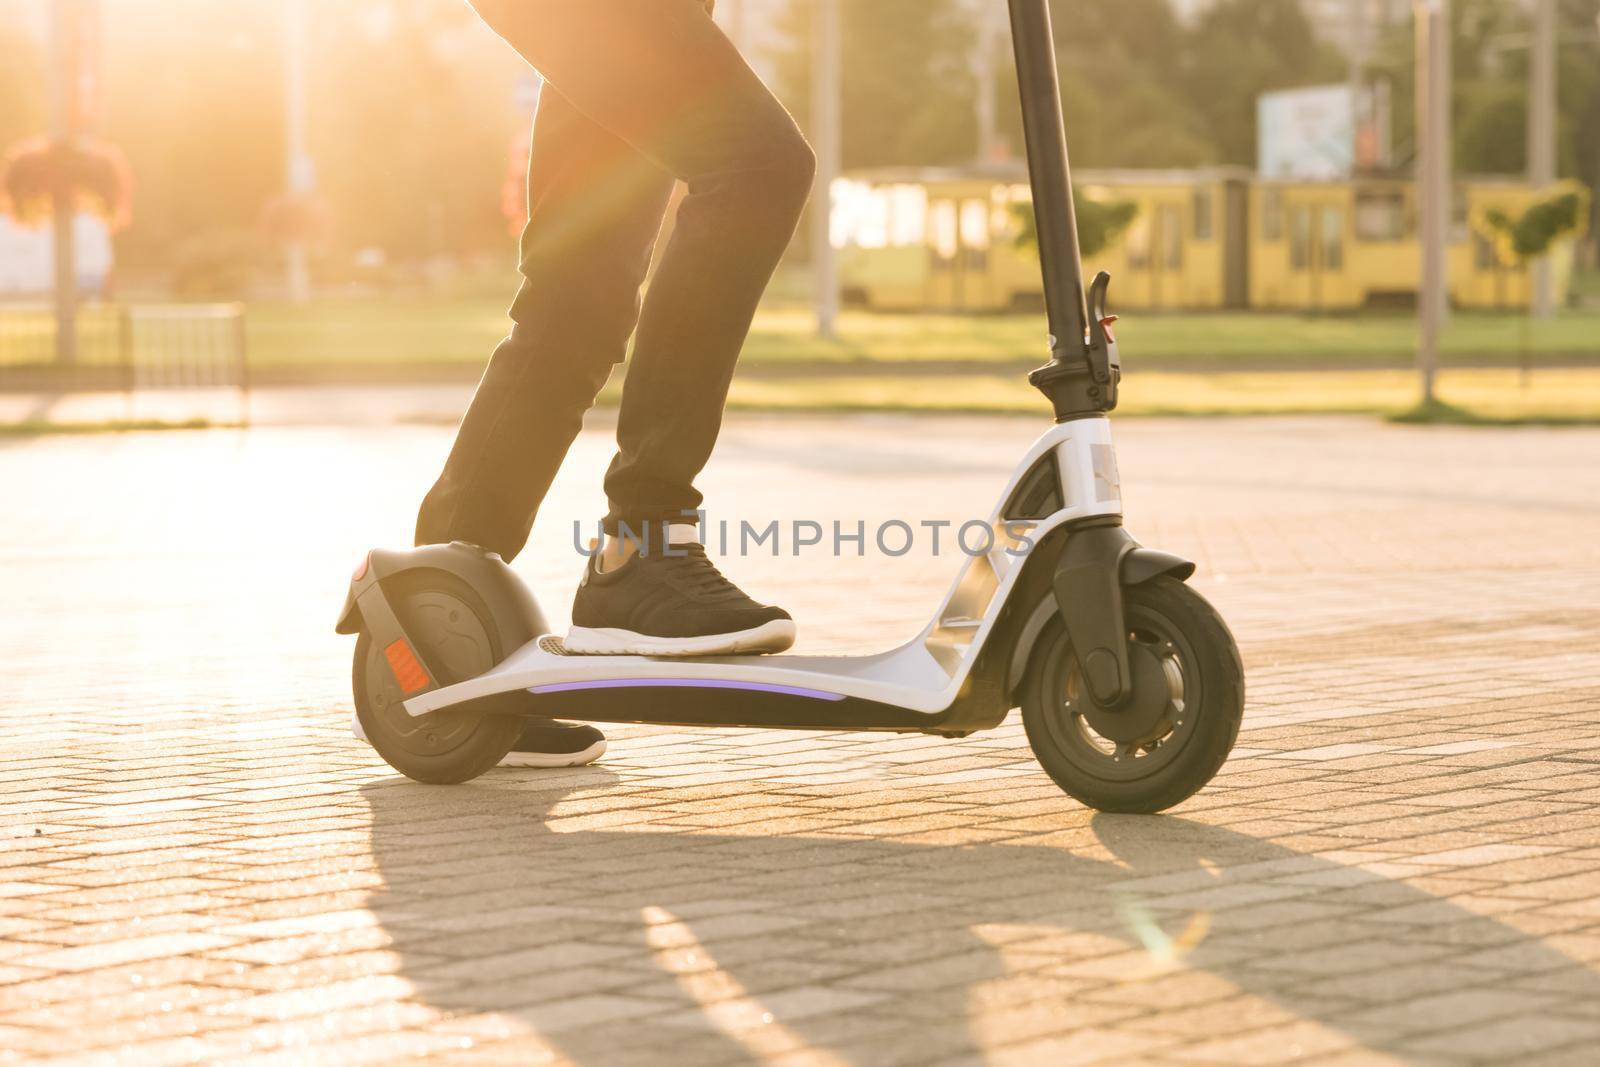 Legs hipster in black sneakers riding an electric scooter road to work the modern way. Fast speed driving electric transport. E-scooter rider, man ride sharing or rent personal eco transportation.